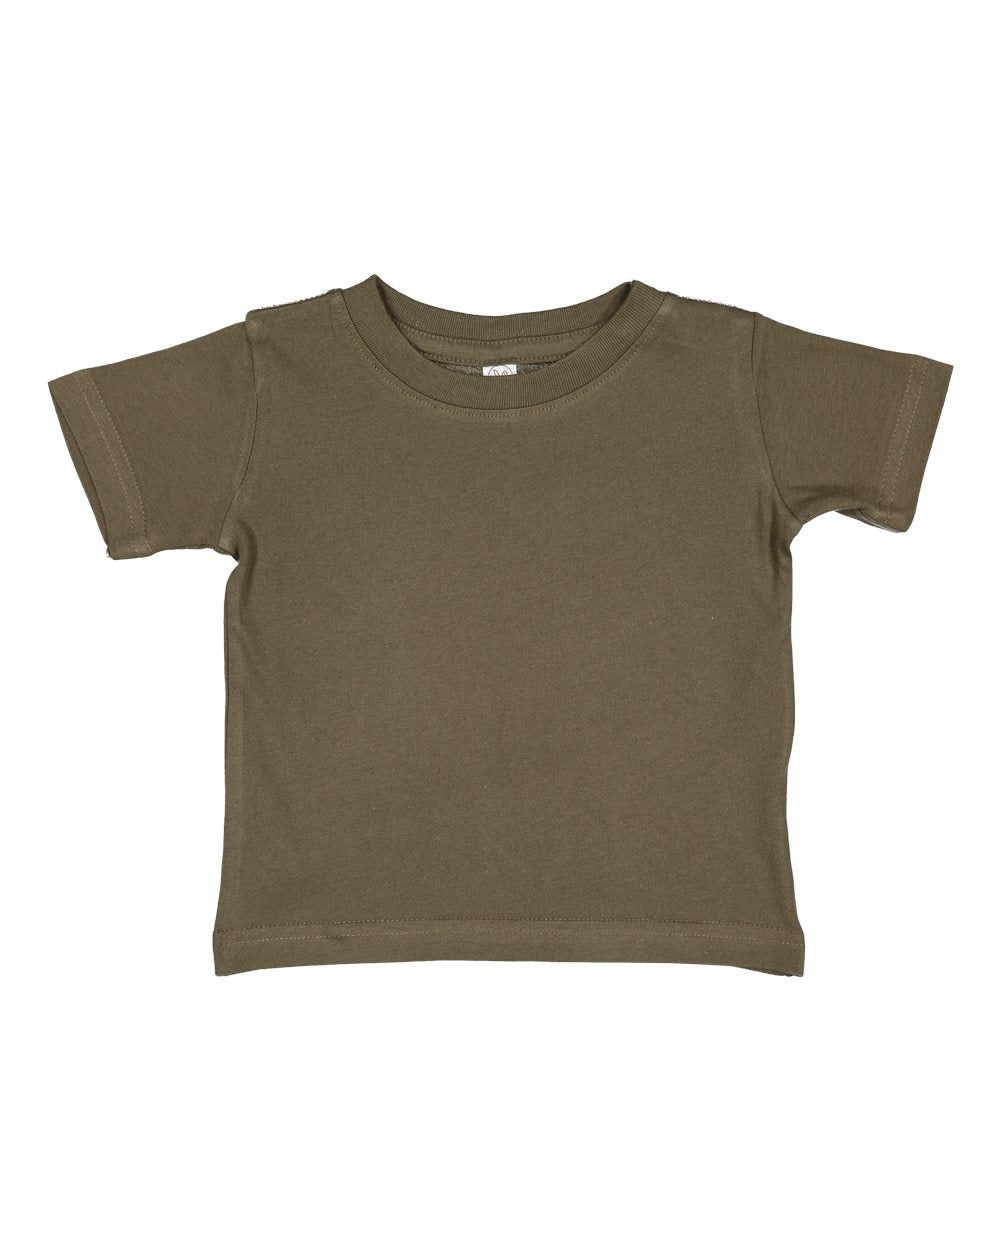 rabbit skins infant jersey tee military green